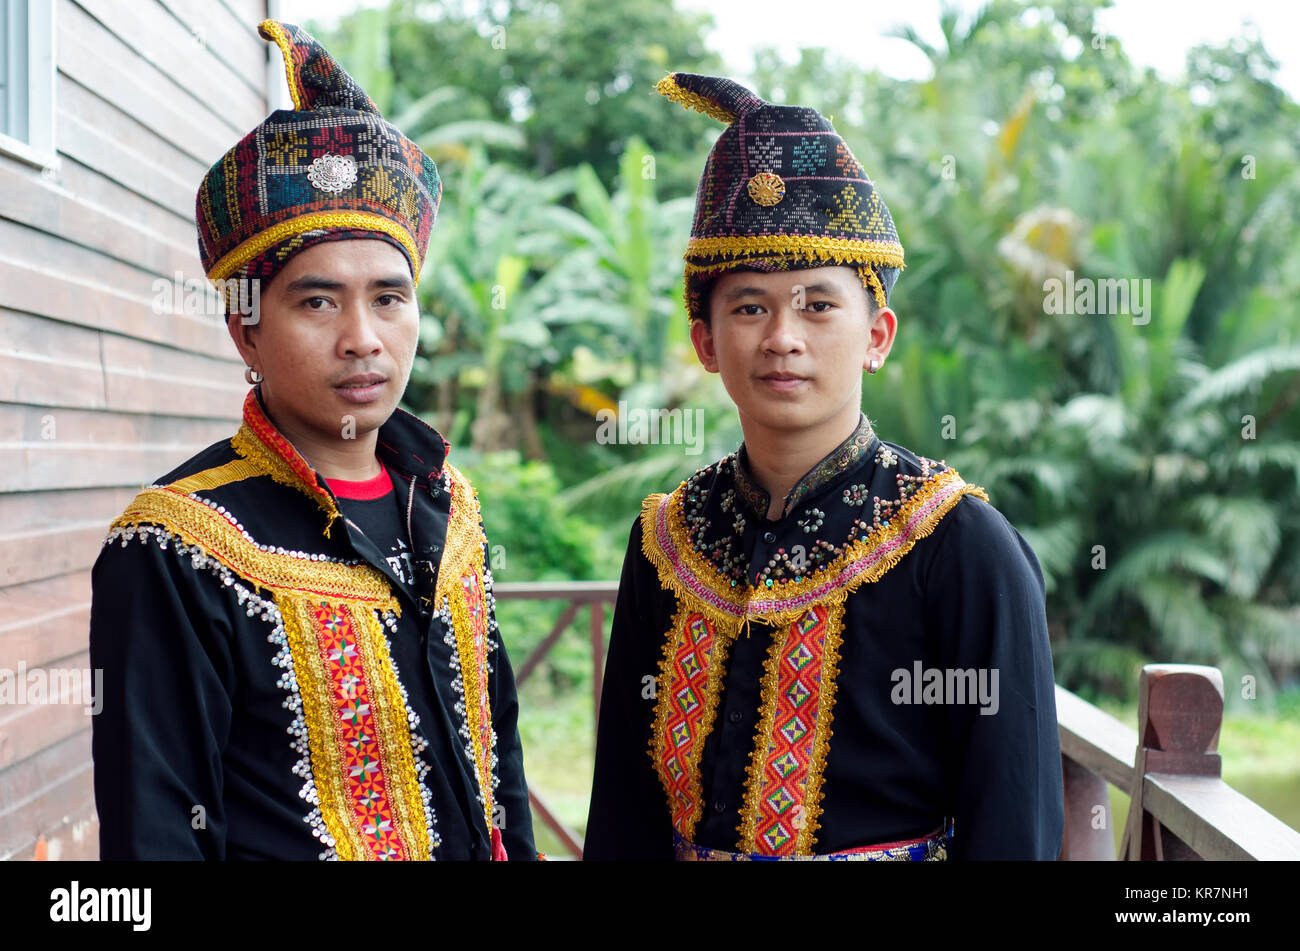 Young Men From Indigenous people of Sabah Borneo in East Malaysia in traditional attire during Musical and Dance Festival. Stock Photo